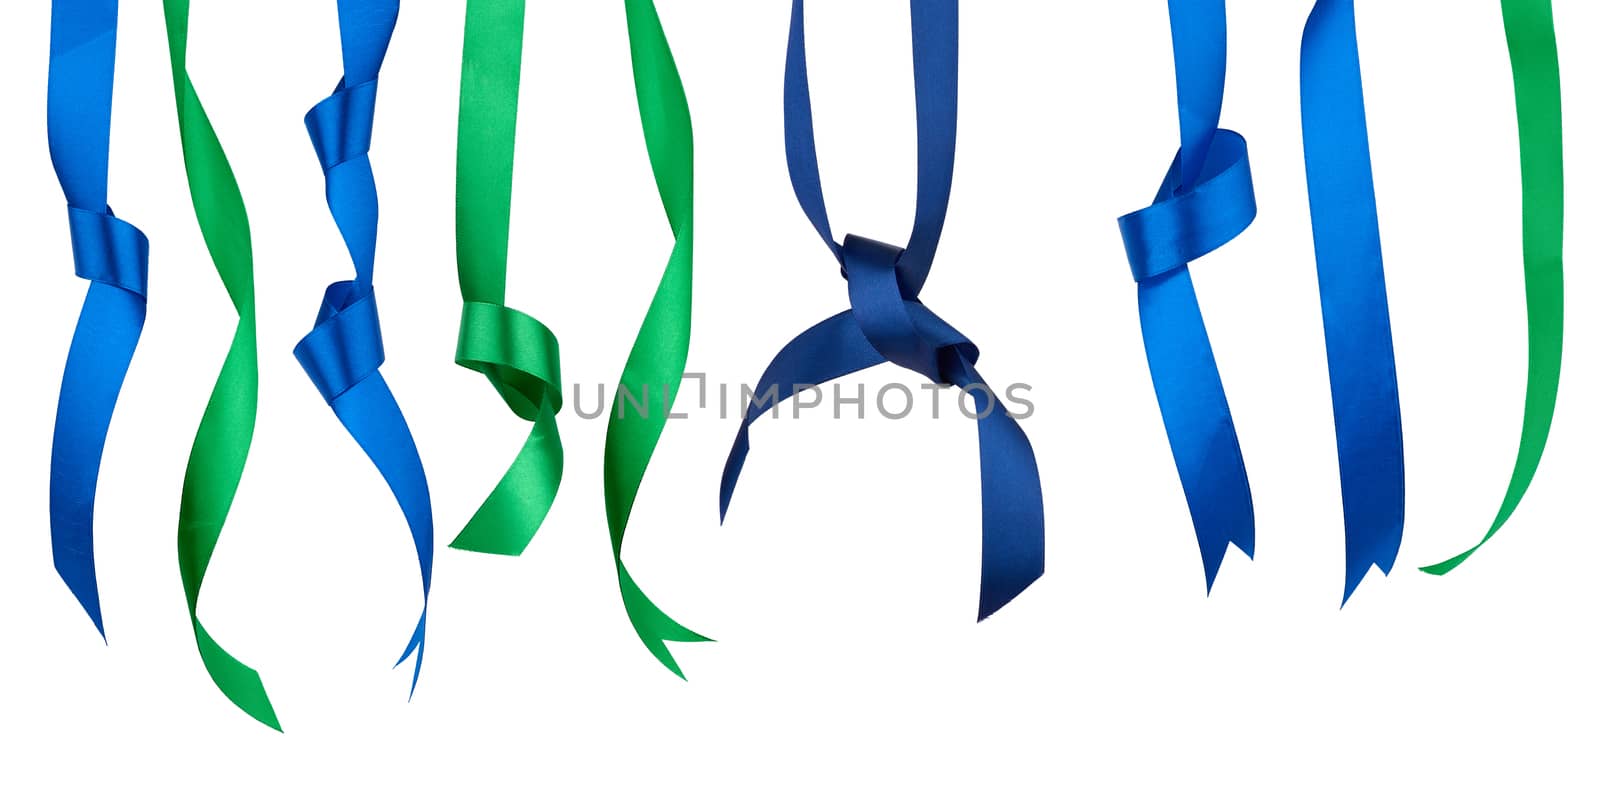 set of twisted blue silk ribbon ends with knots isolated on white background, trendy colors of elements for designer